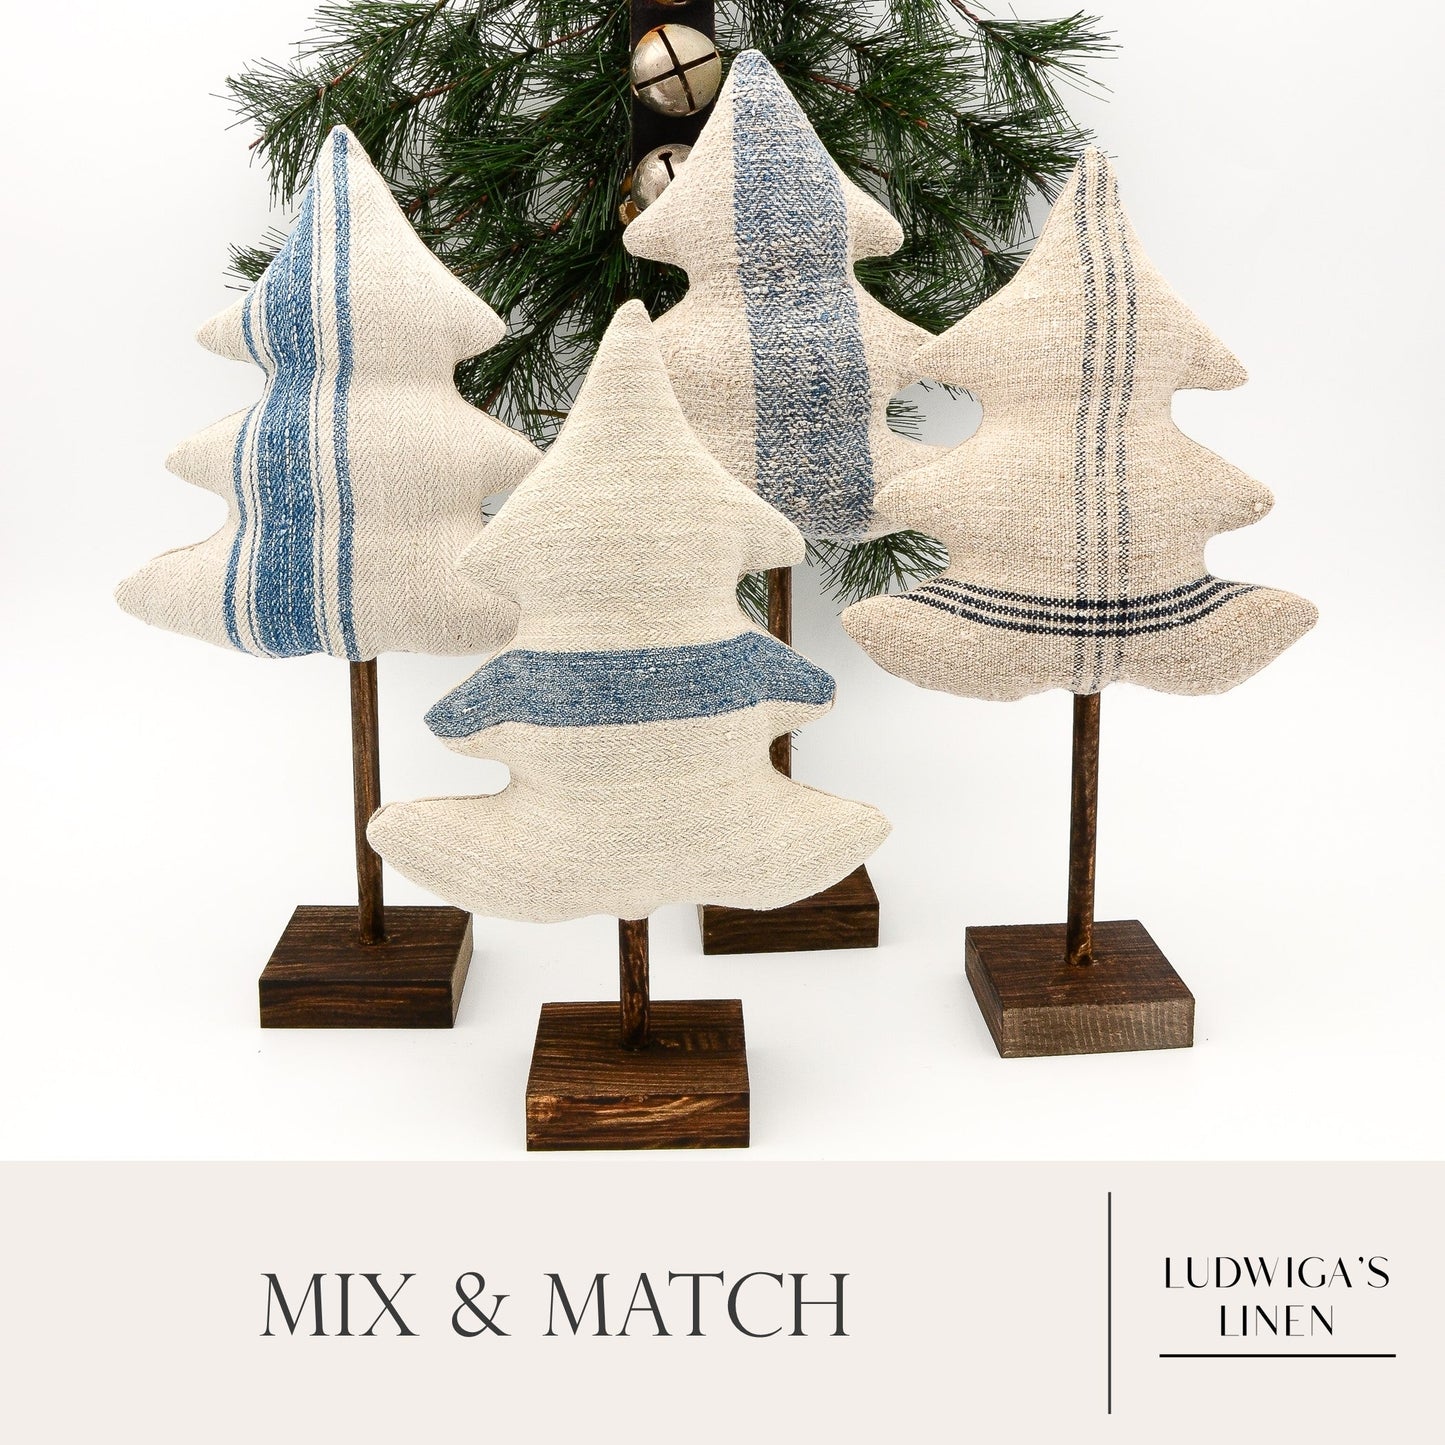 Christmas/holiday ornaments - mix and match European grain sack linen trees, each on a dark brown stained wooden stand